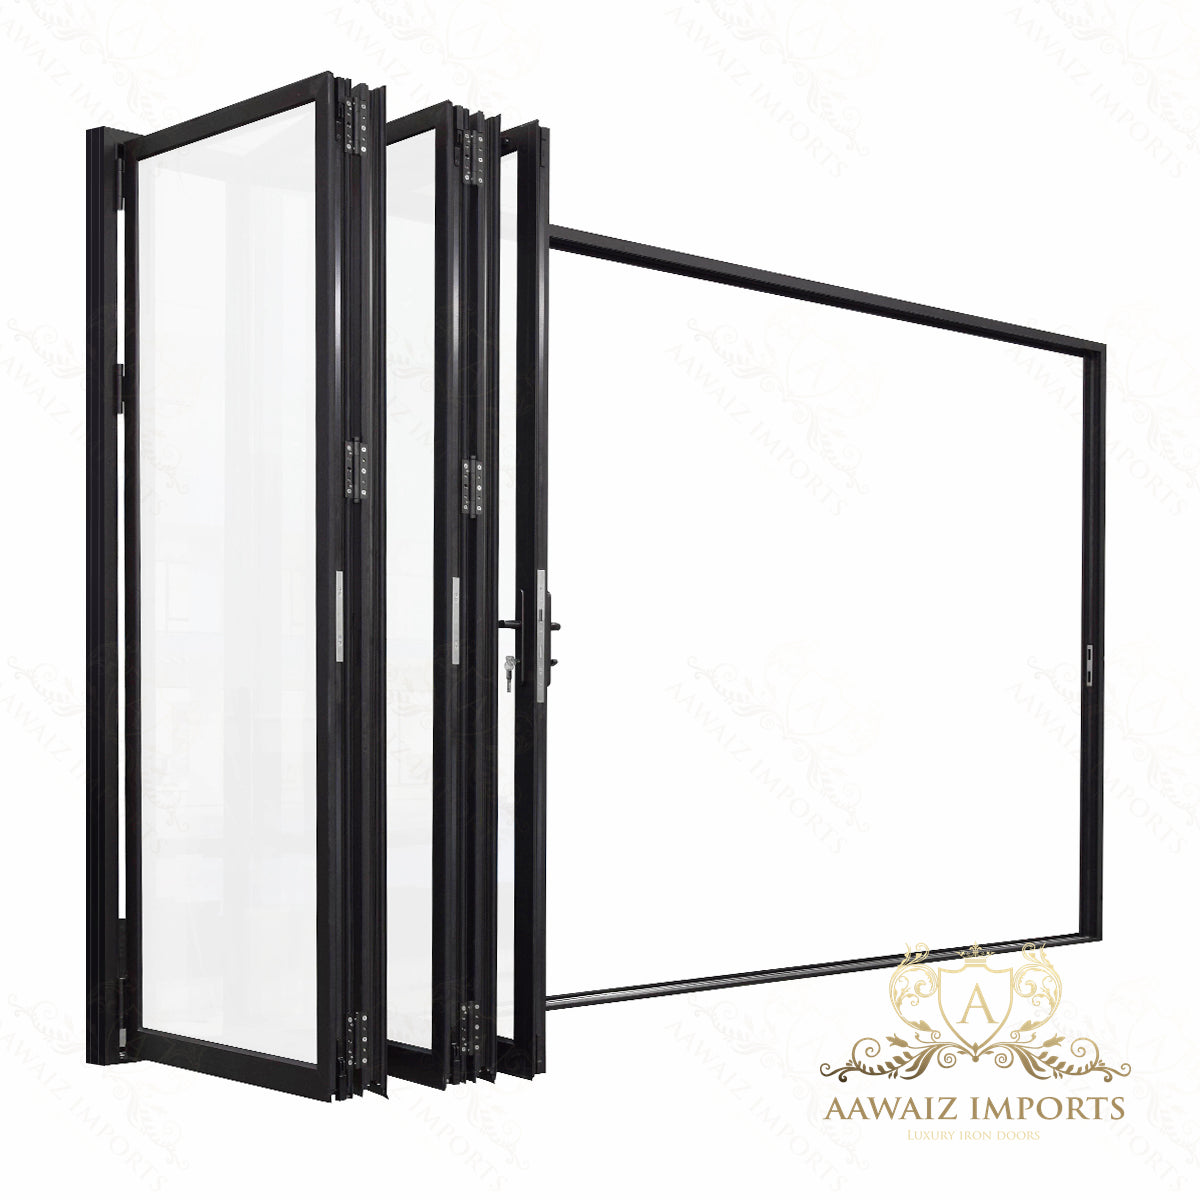 14 Ft Wide By 9 Ft Tall (168" By 108") Aluminum Bi Fold Patio Door  Outswing  Thermal Break Insulated Matt Black Finish